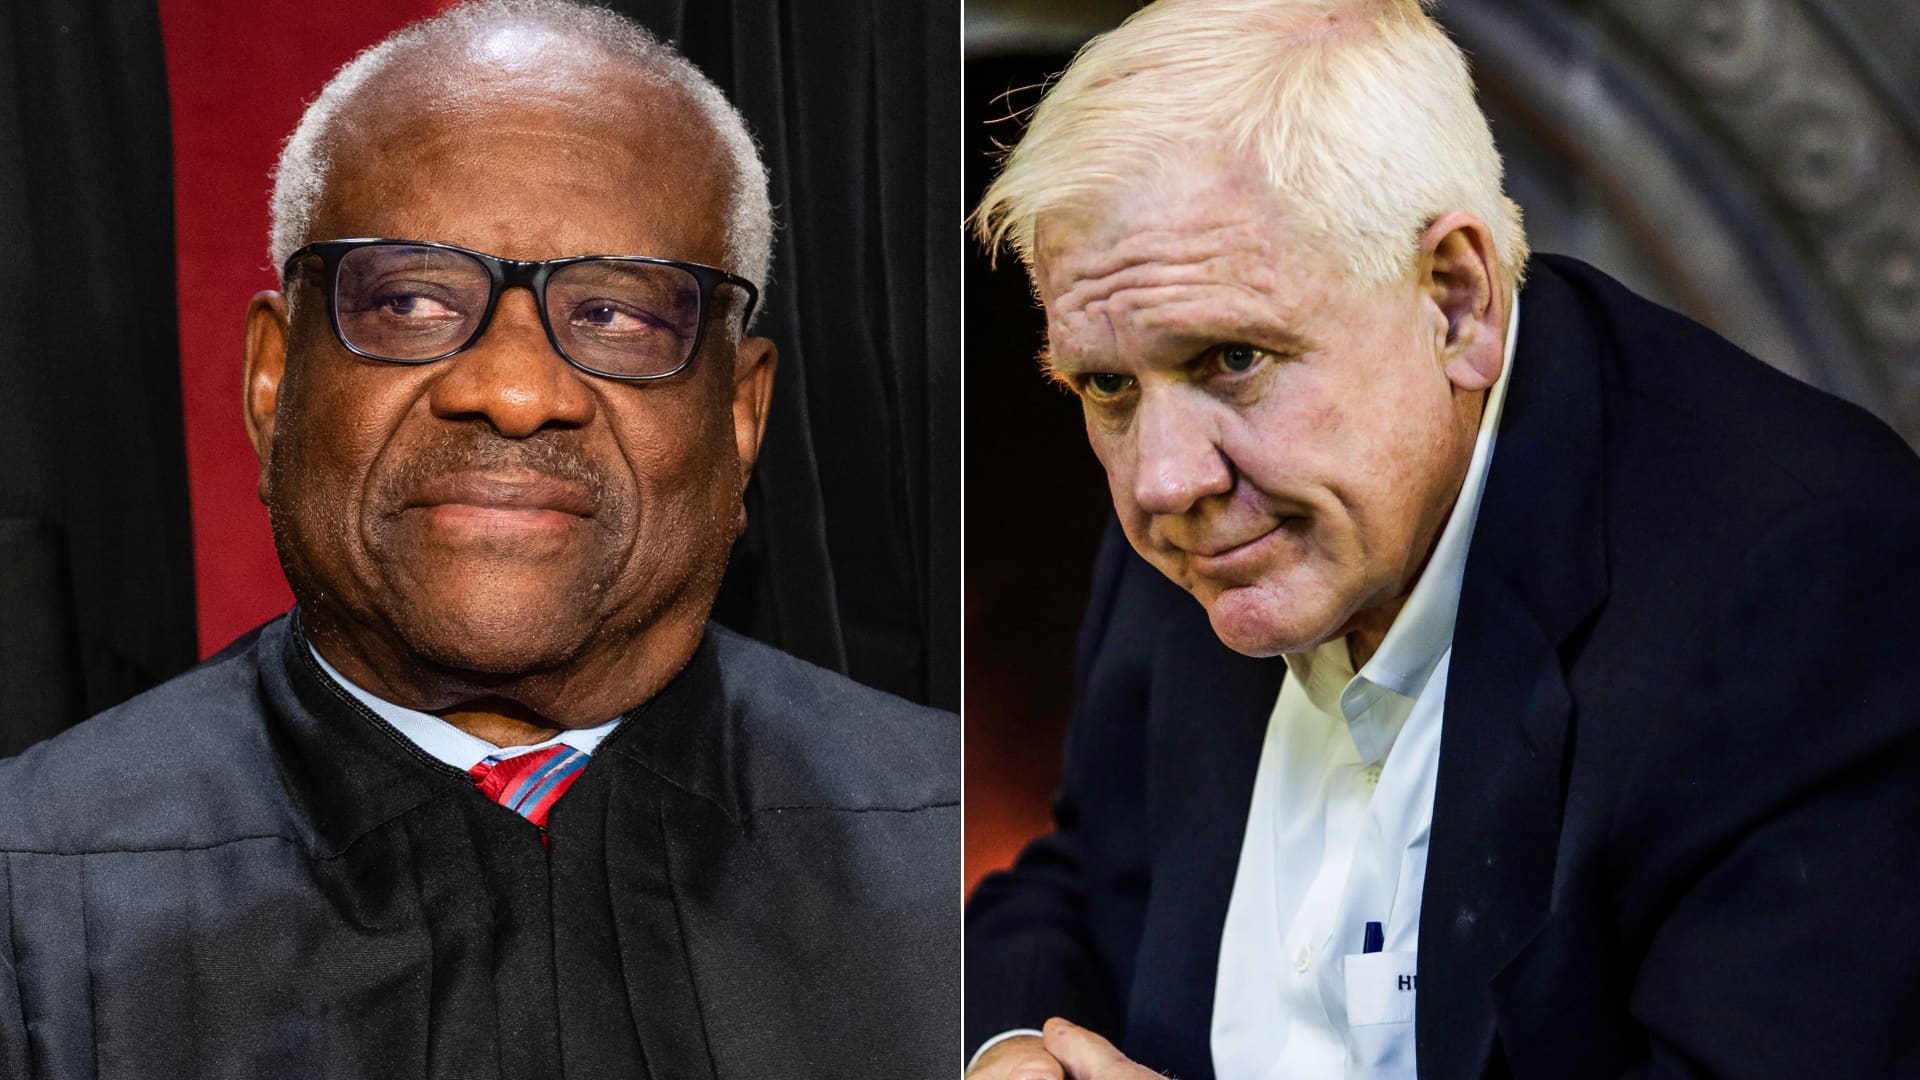 Supreme Court: Harlan Crow paid school tuition for Clarence Thomas’ nephew, report says